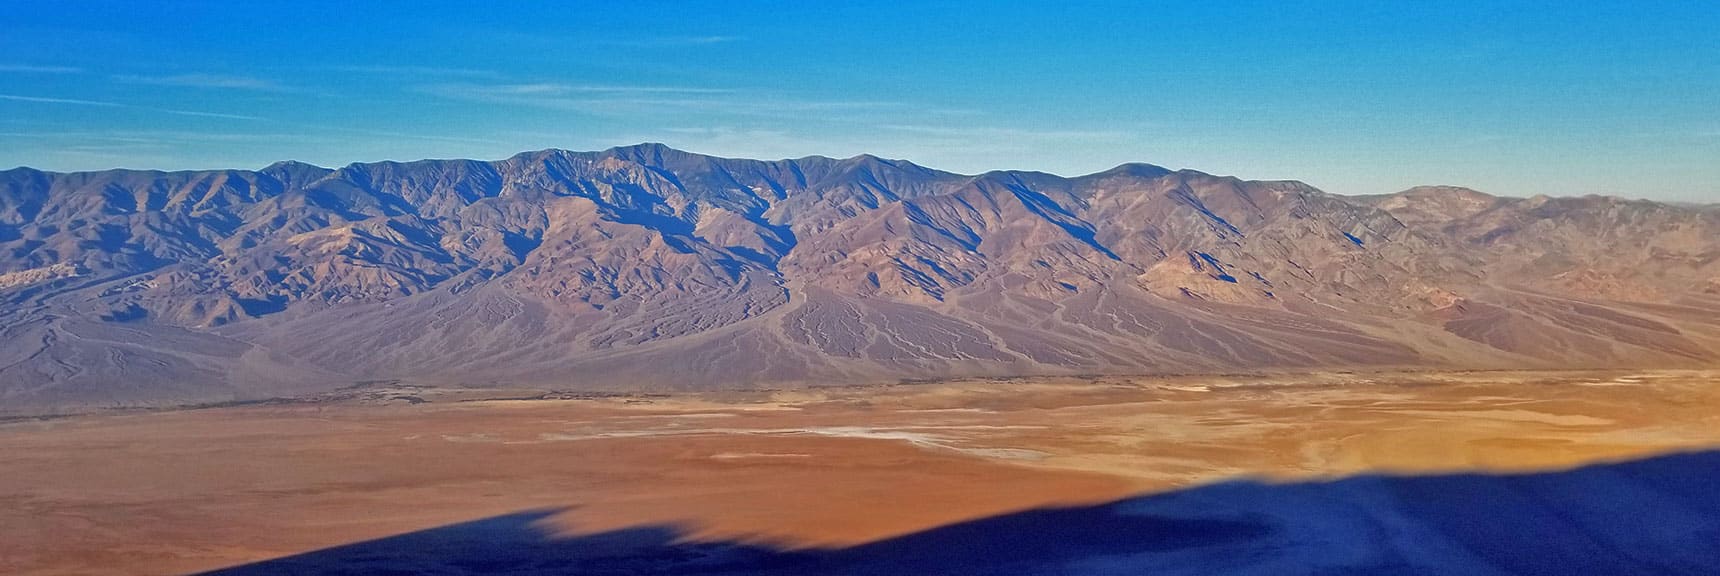 Sunrise on the Panamint Mountain Range from Dante's View to Mt. Perry Trail | Dante's View to Mt. Perry | Death Valley National Park, CA